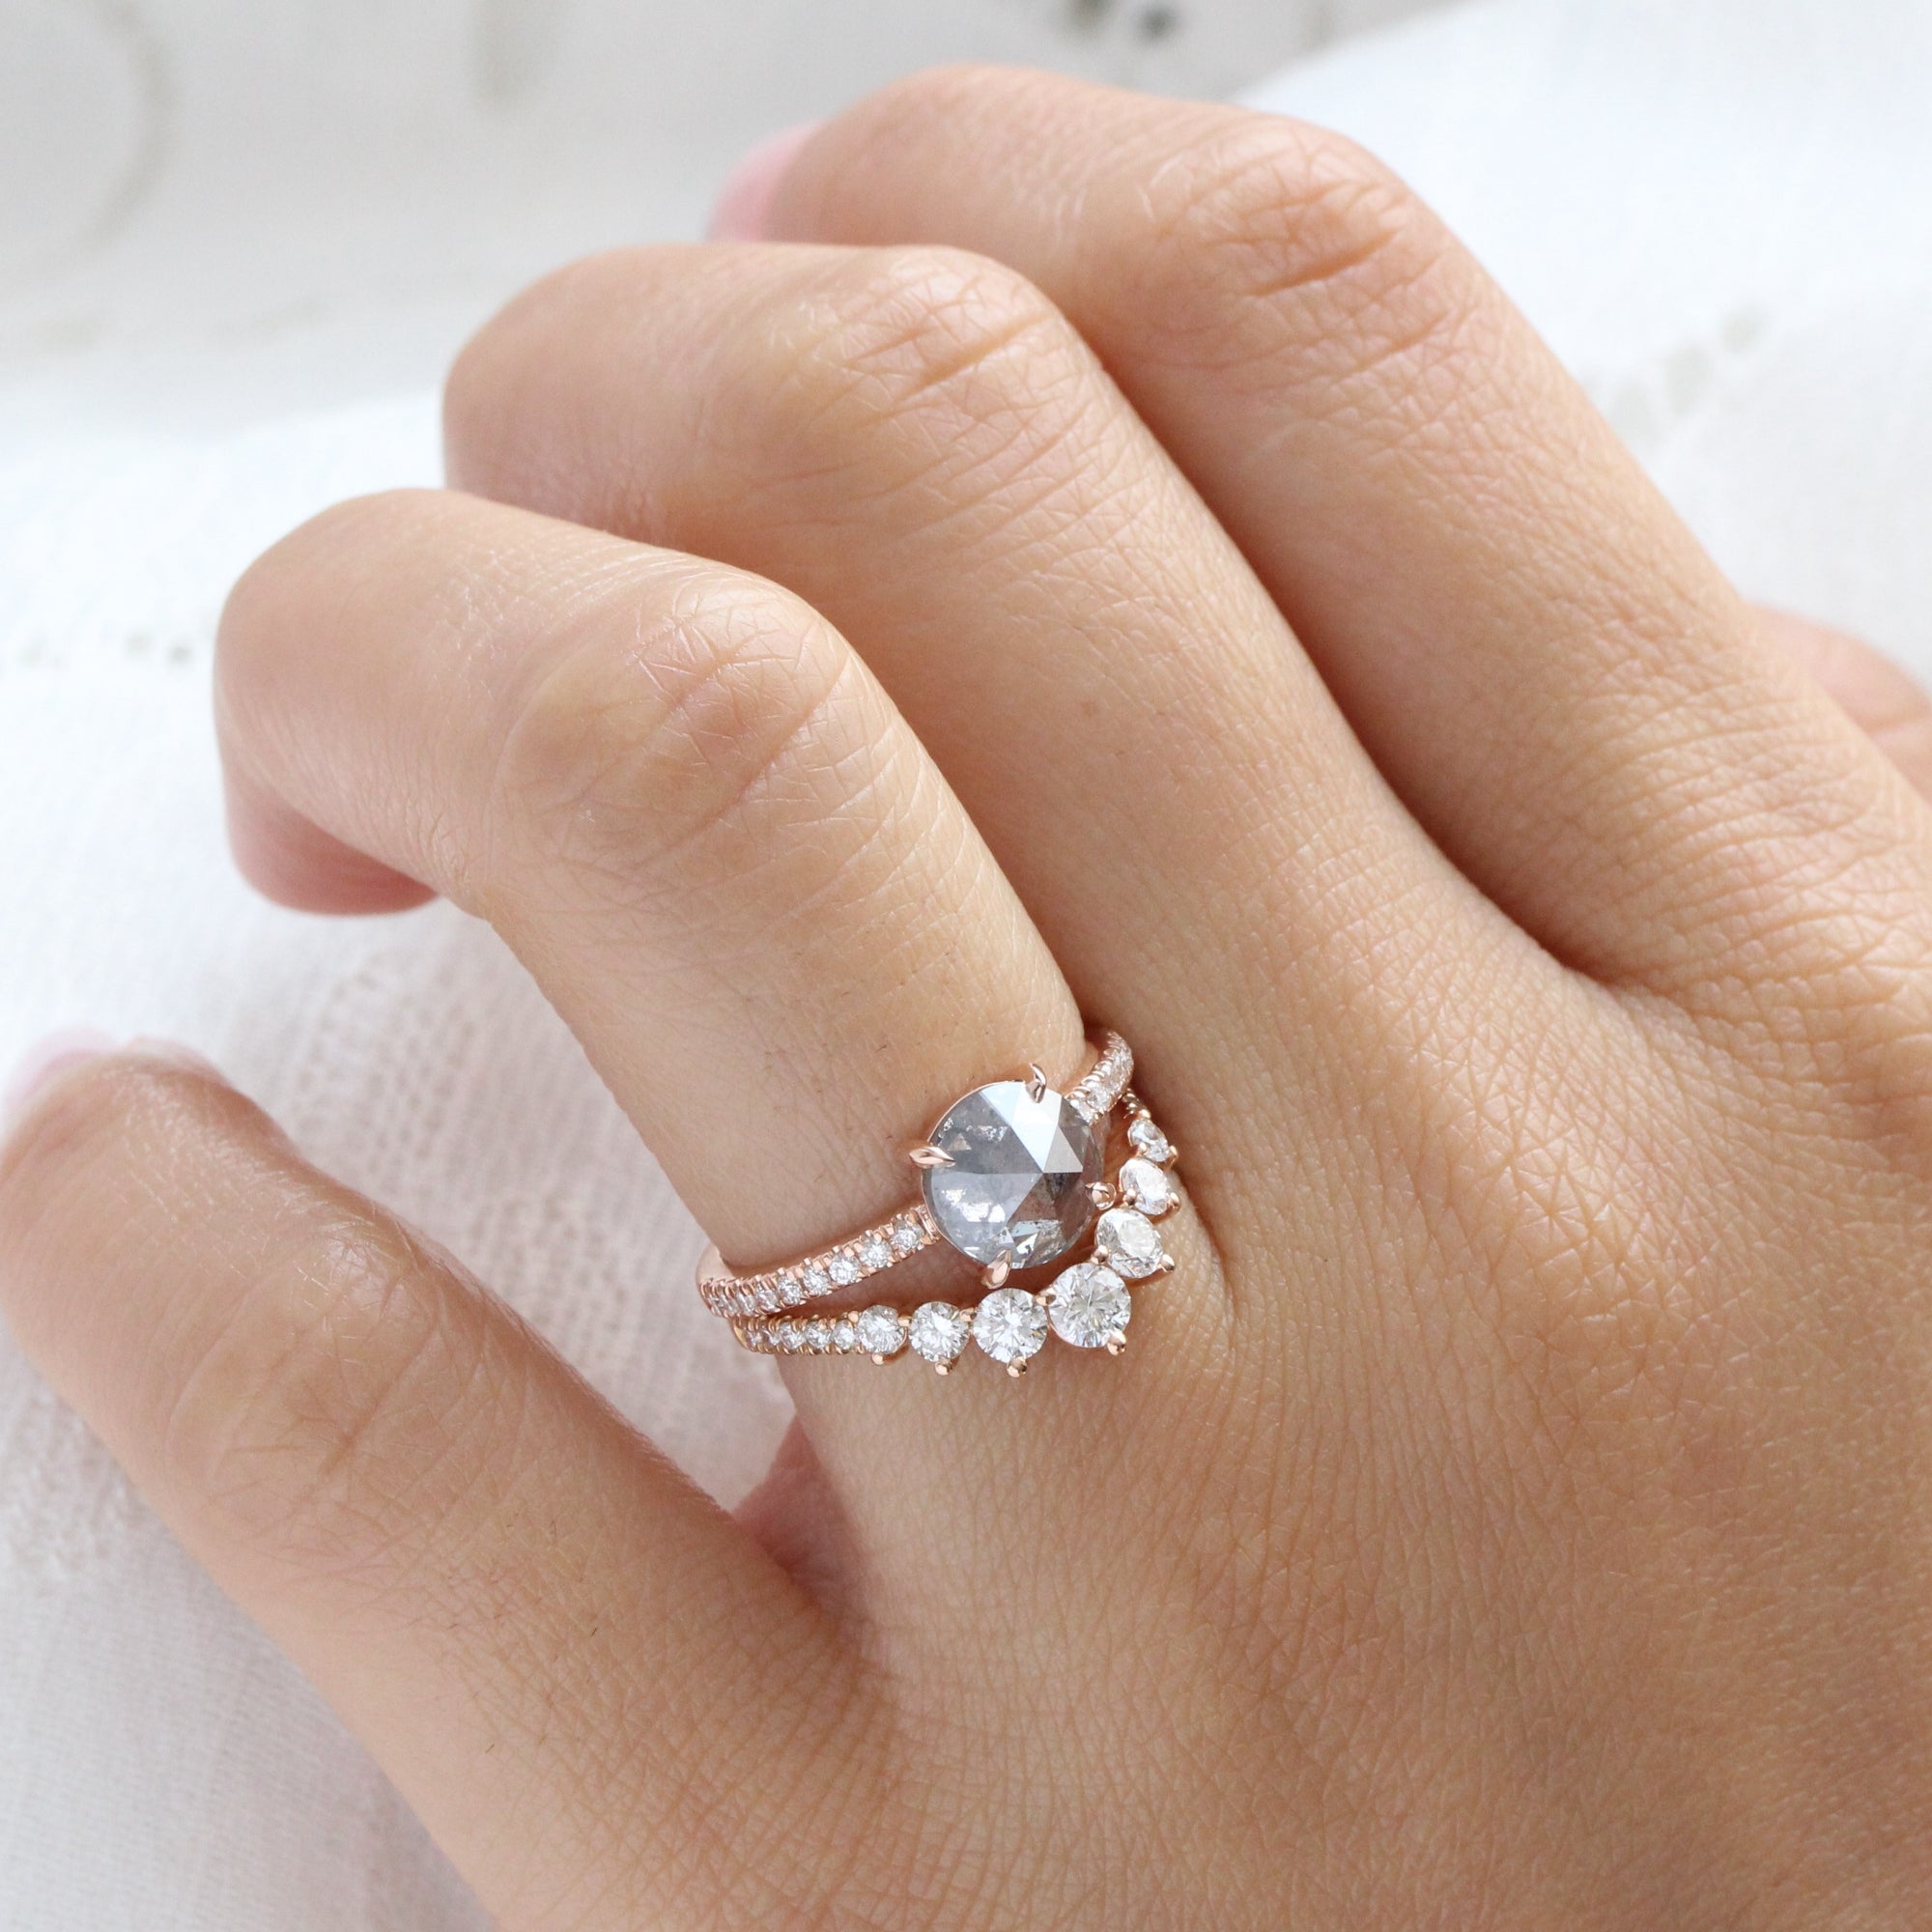 Rose cut salt and pepper diamond ring rose gold solitaire grey diamond pave ring la more design jewelry